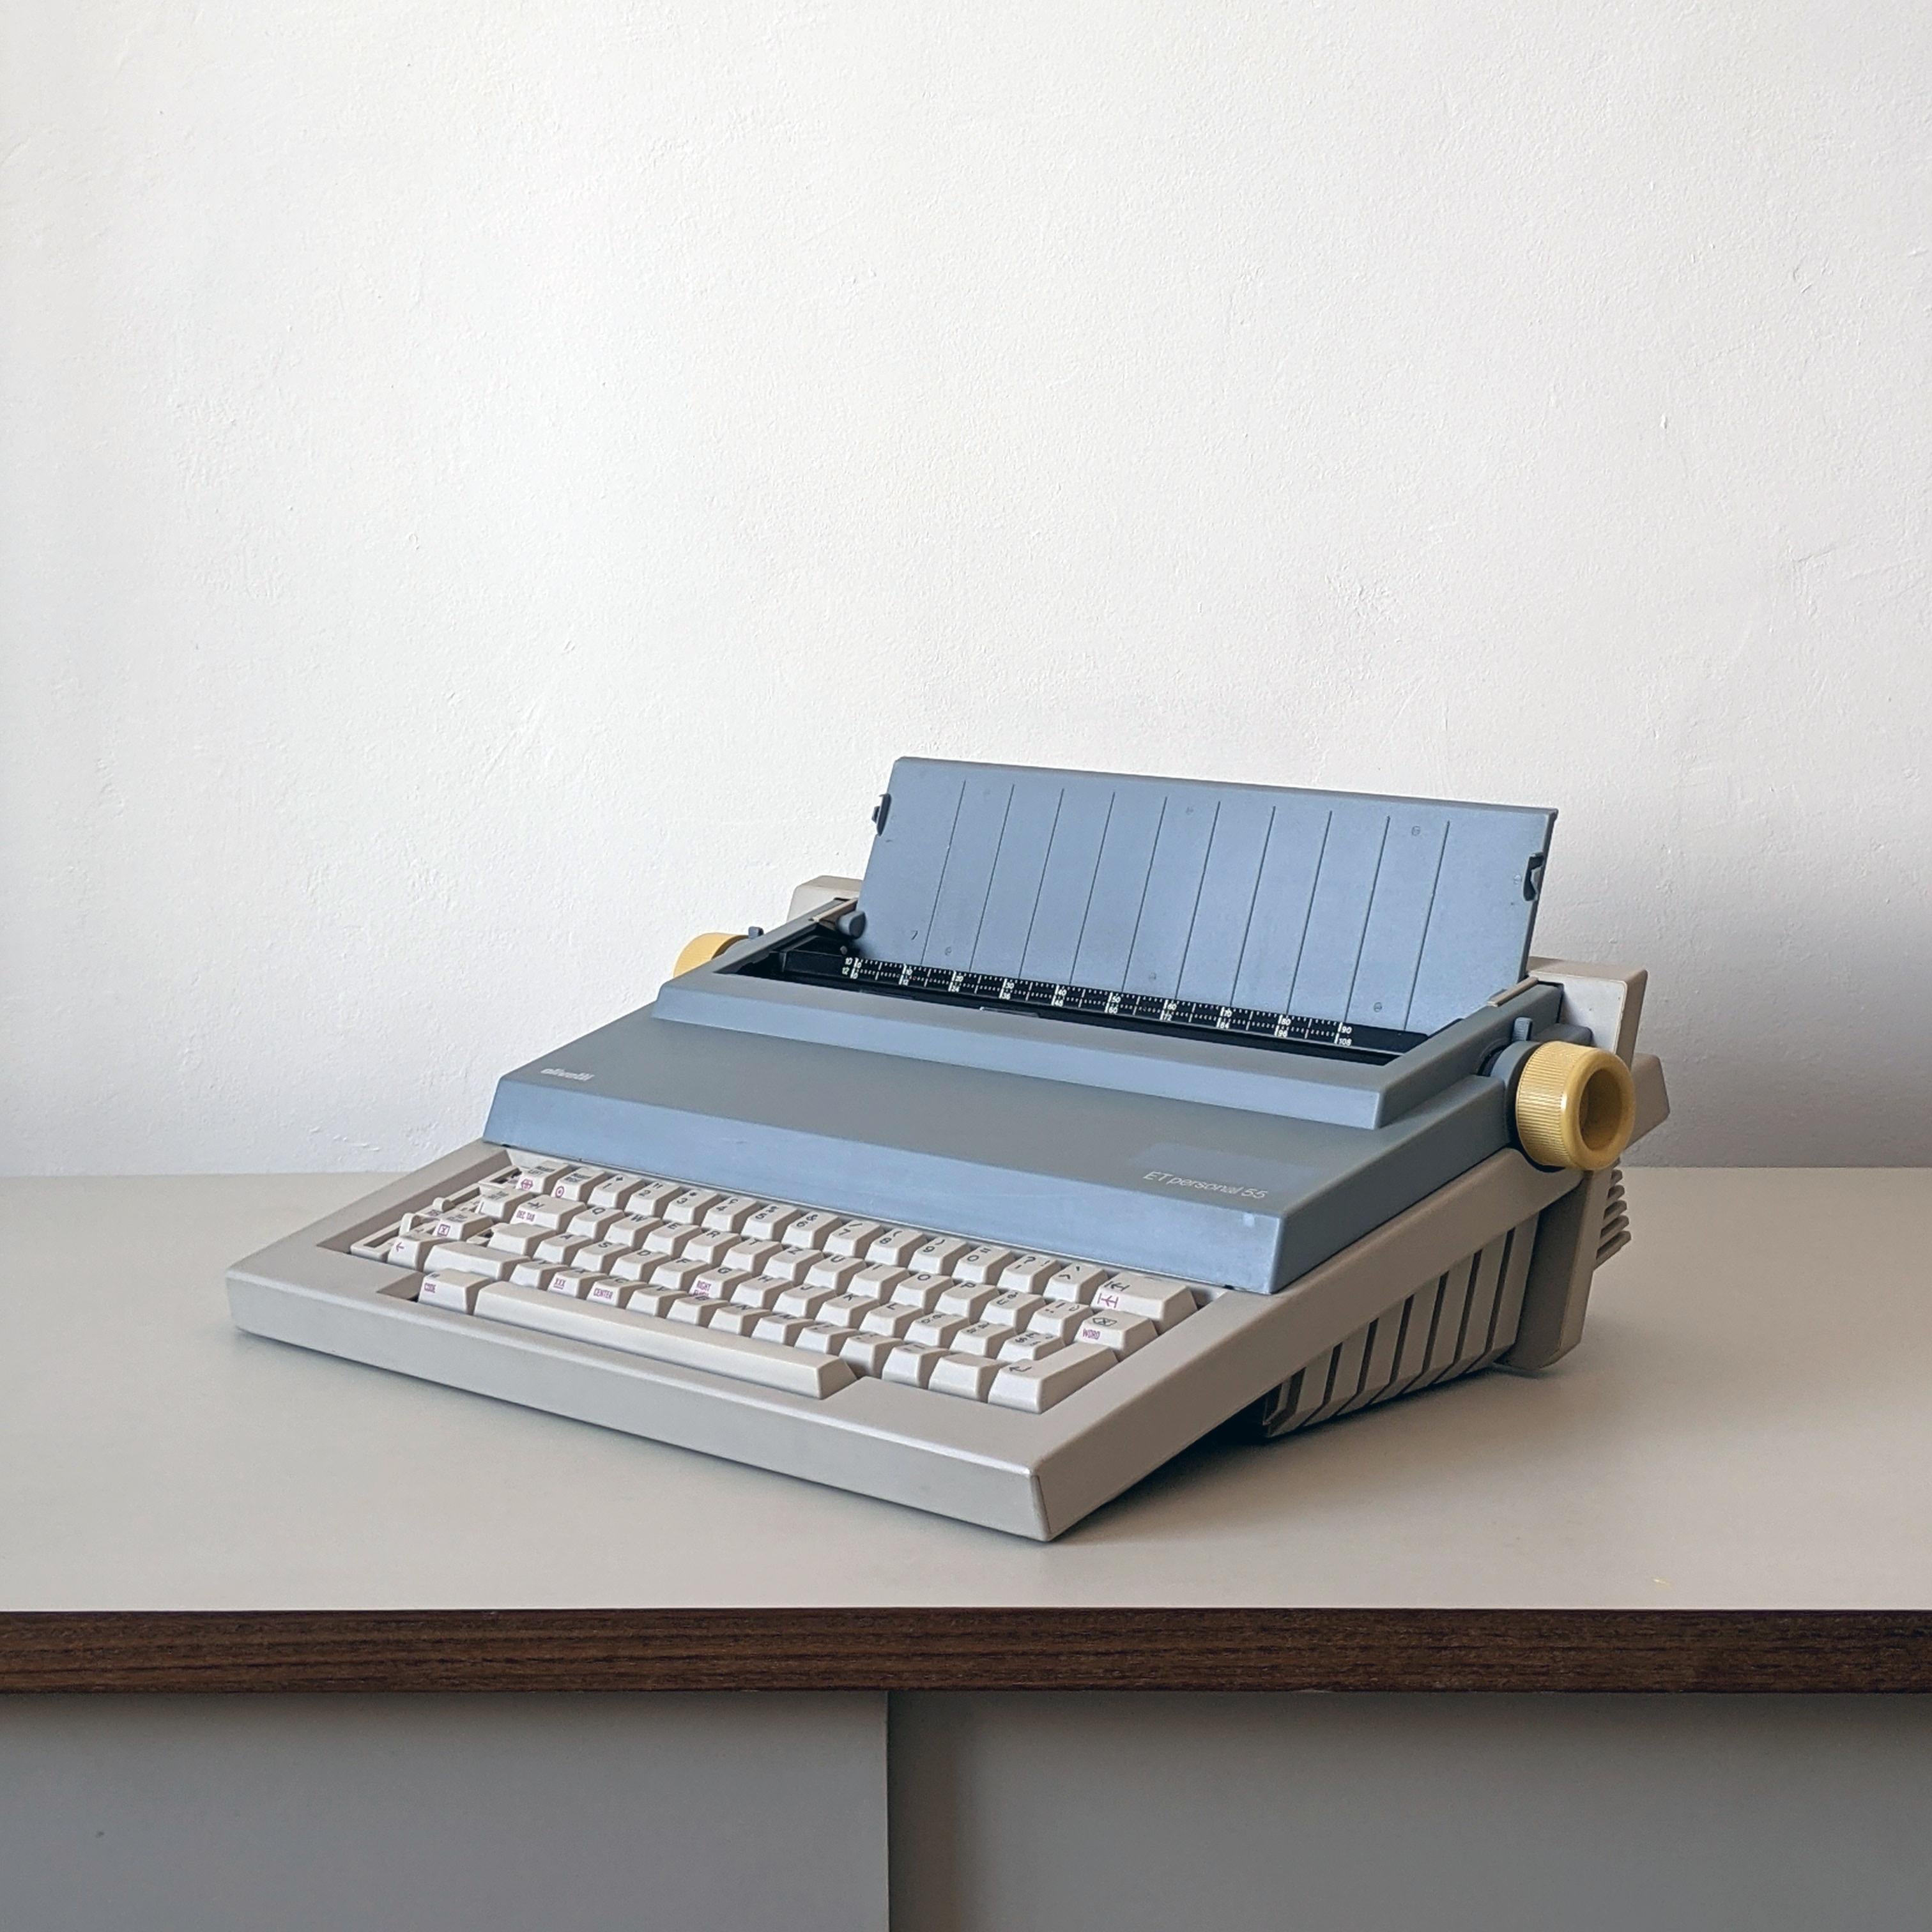 Mario Bellini (designer), Italy
Olivetti (manufacturer), Italy
ET Personal portable (electric) typewriter, designed 1985-86

Moulded ABS plastic (and other plastics and metals). Complete with casing tems and cable.

Condition: Fully